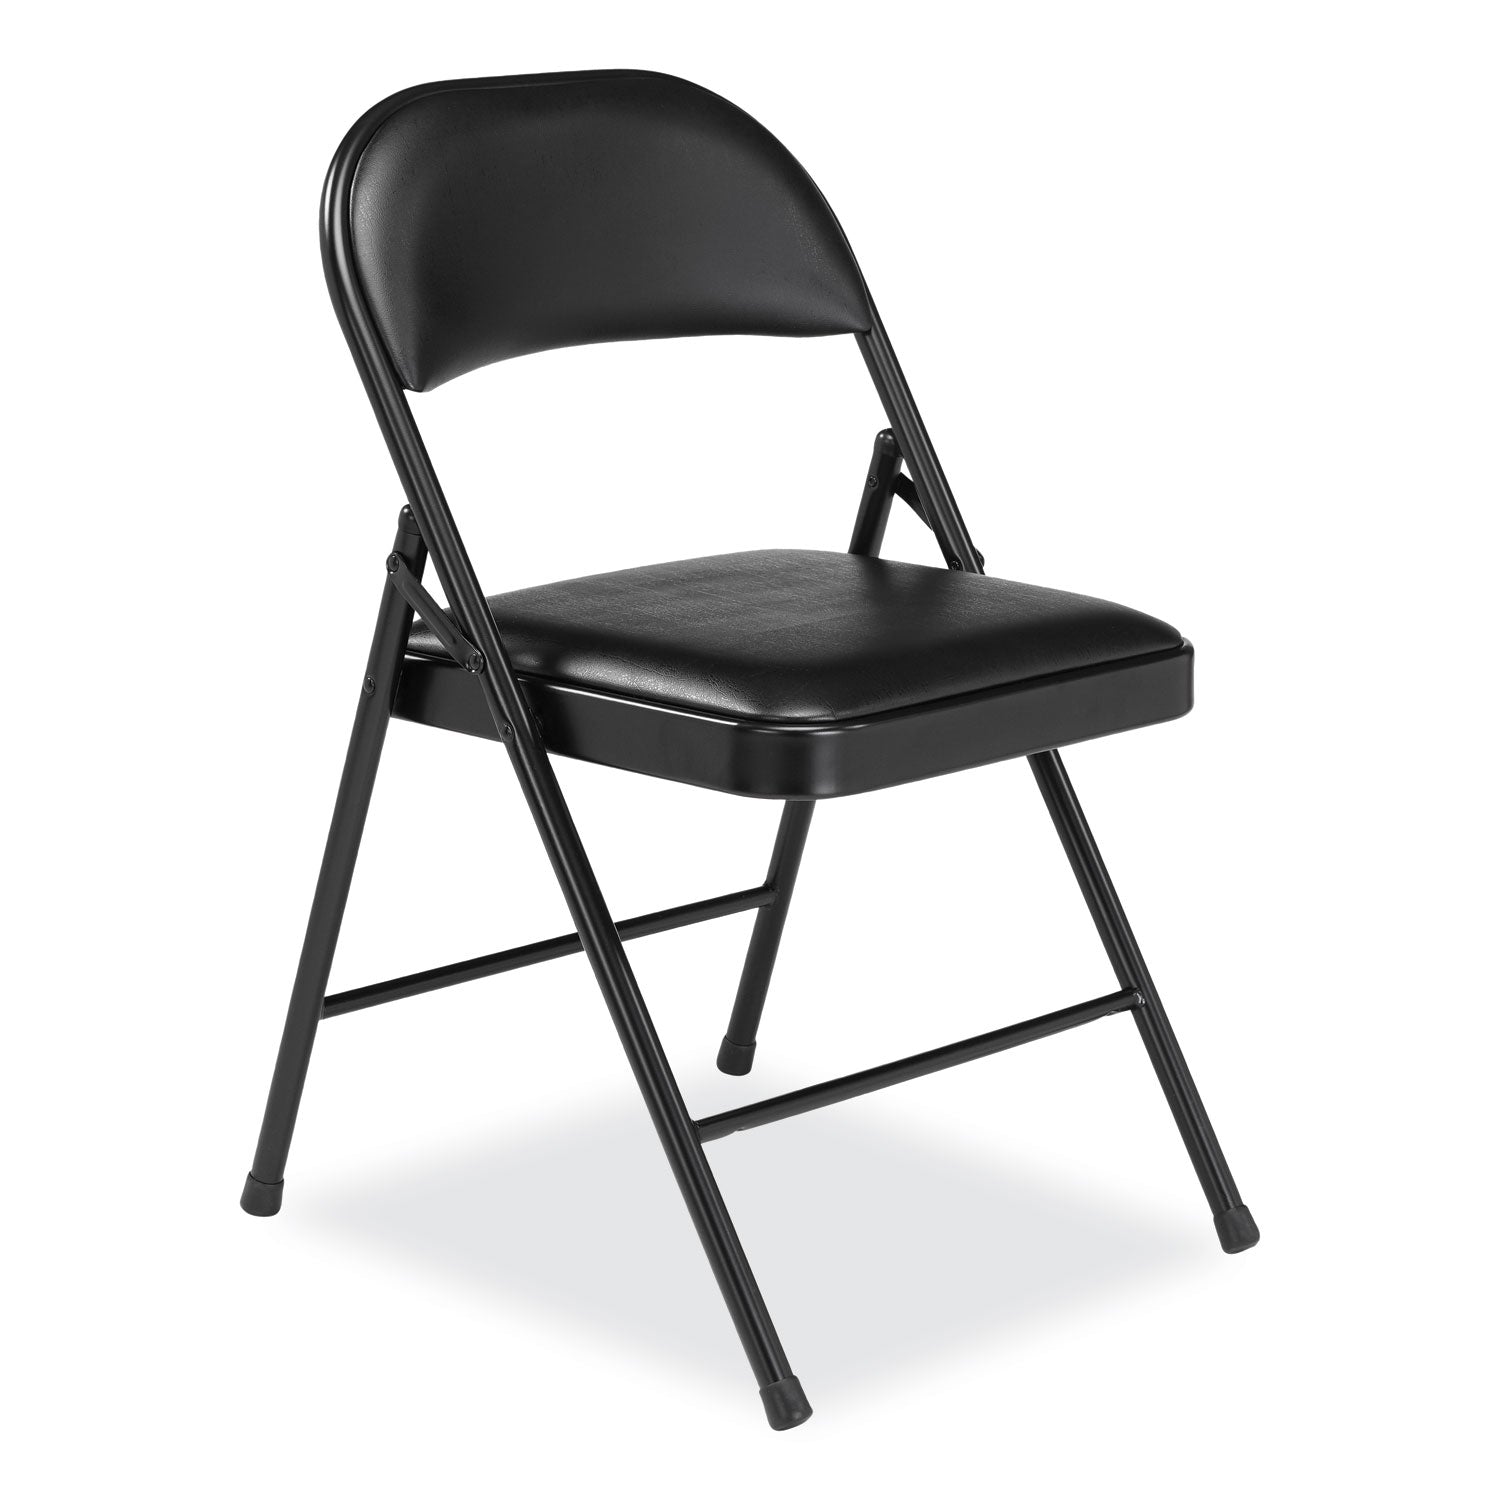 950-series-vinyl-padded-steel-folding-chair-supports-up-to-250-lb-1775-seat-height-black-4-cartonships-in-1-3-bus-days_nps950 - 2